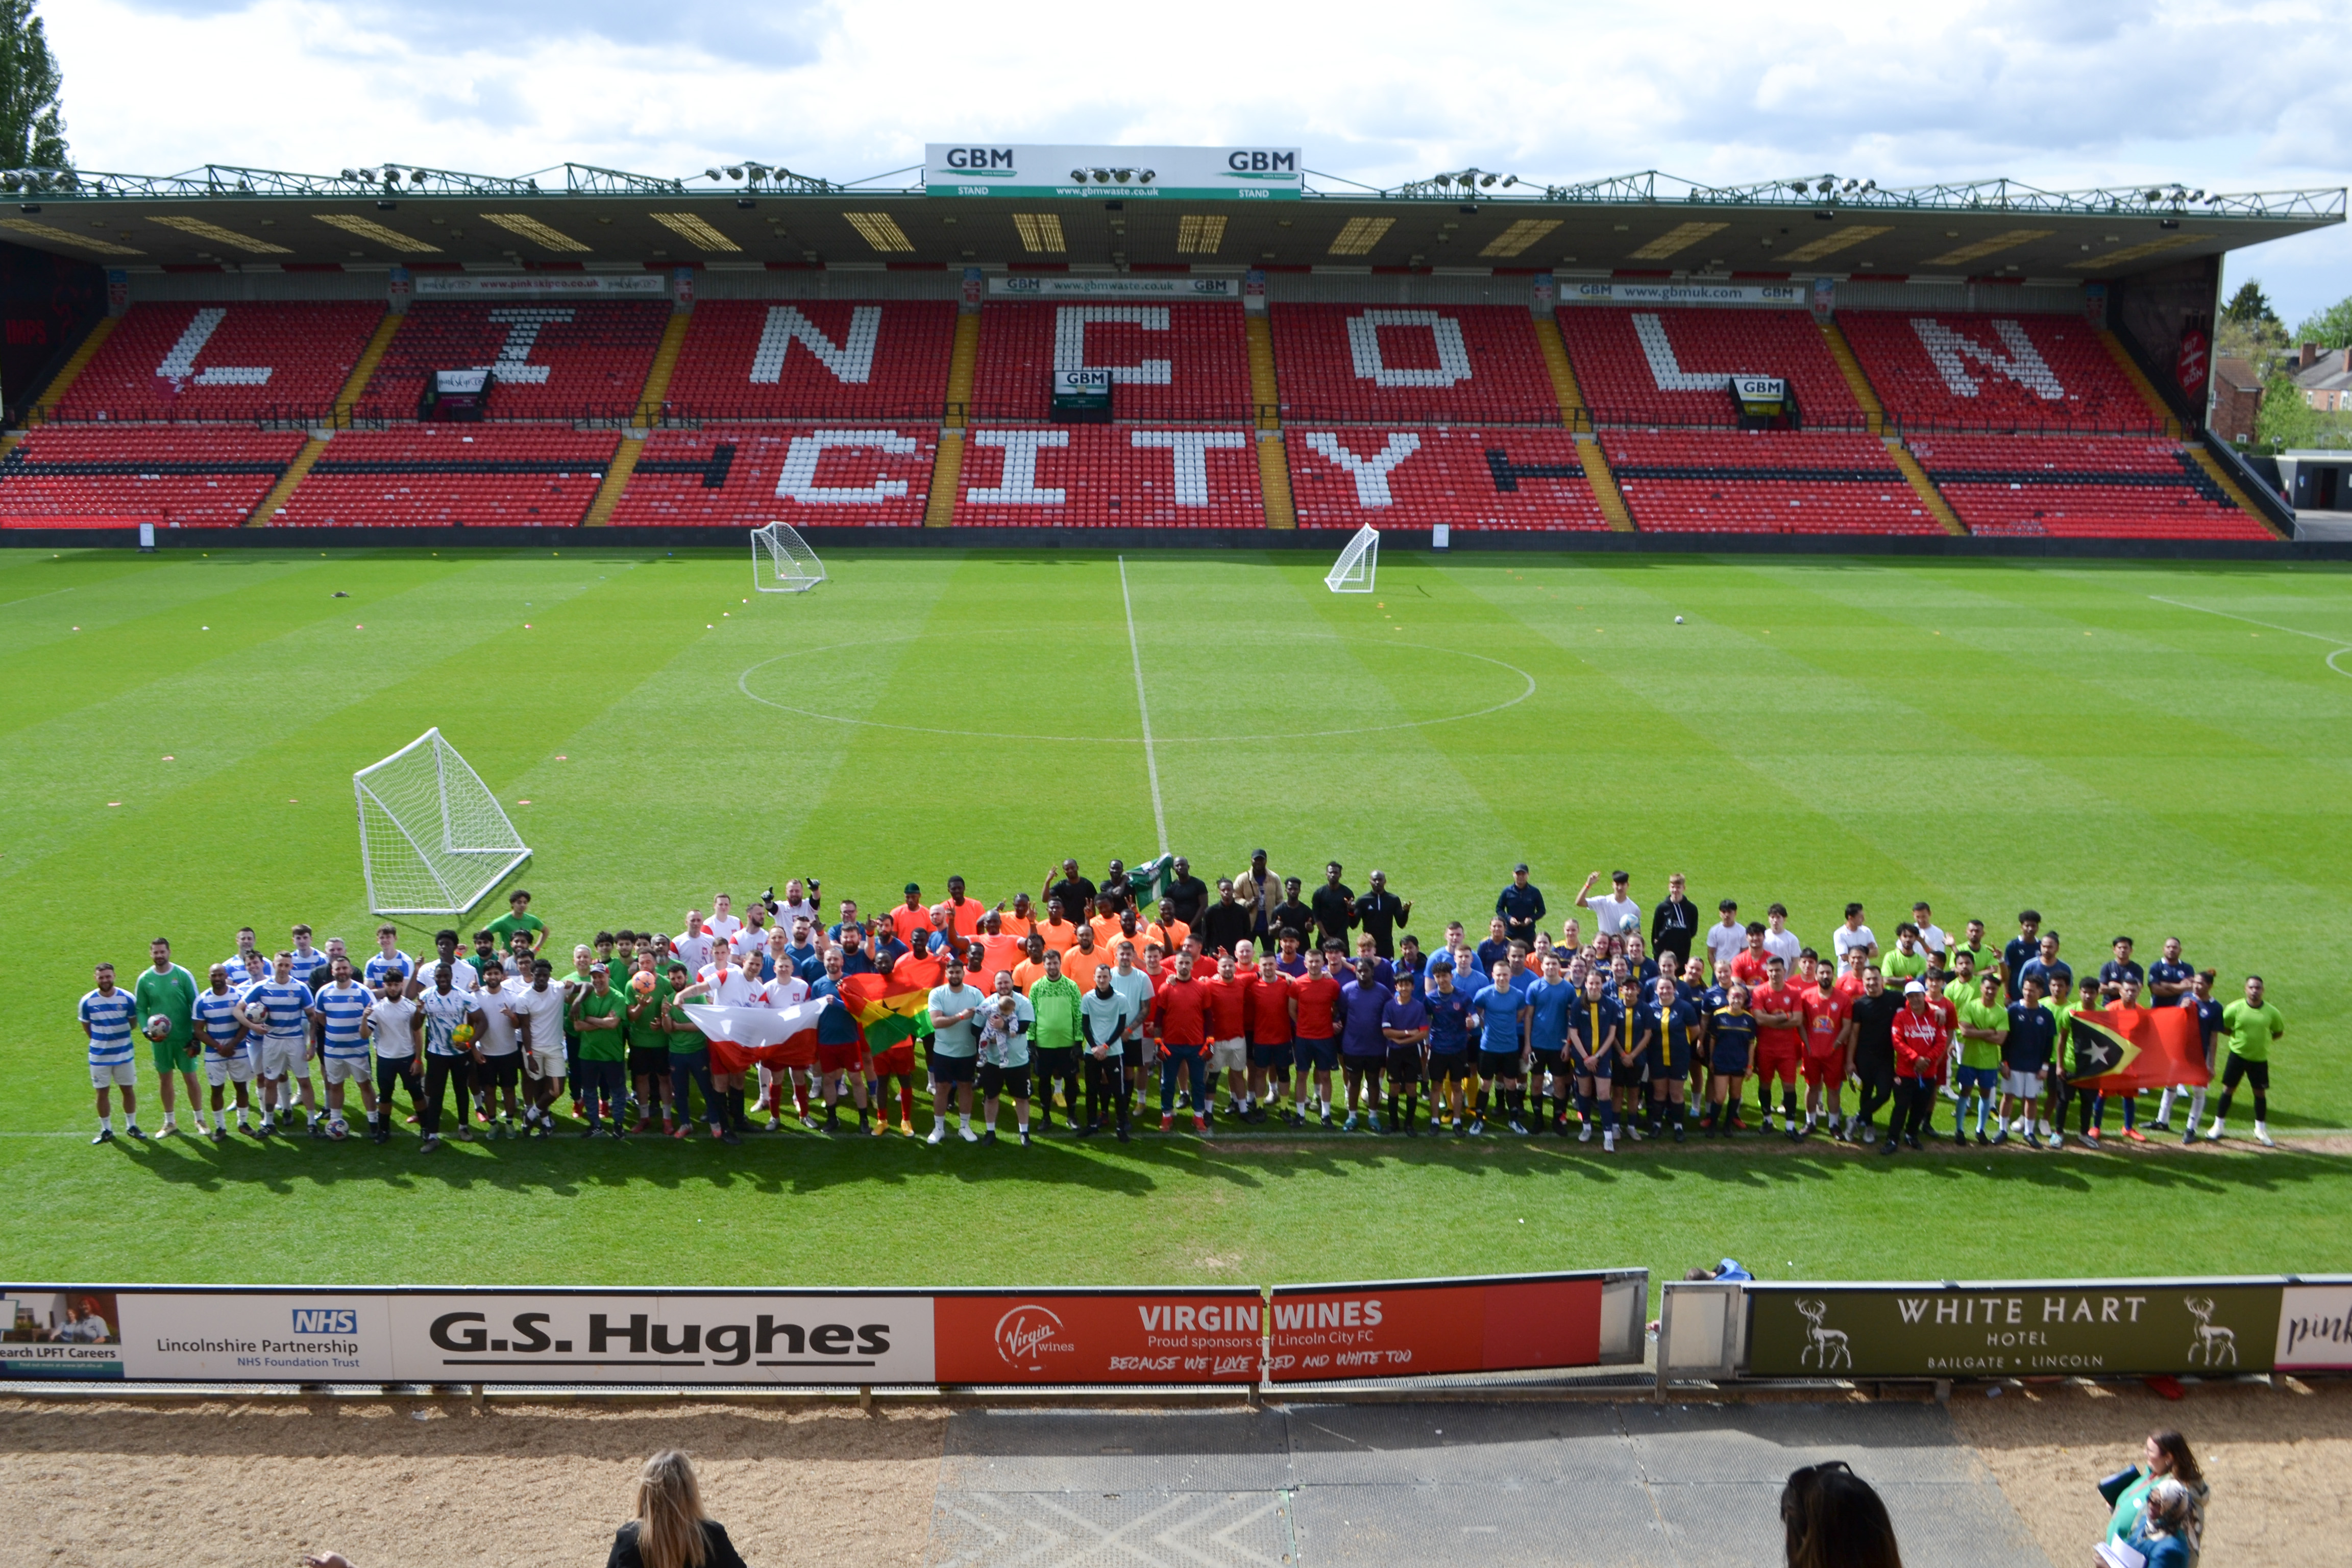 a photo of all the teams from the stands at the LNER stadium